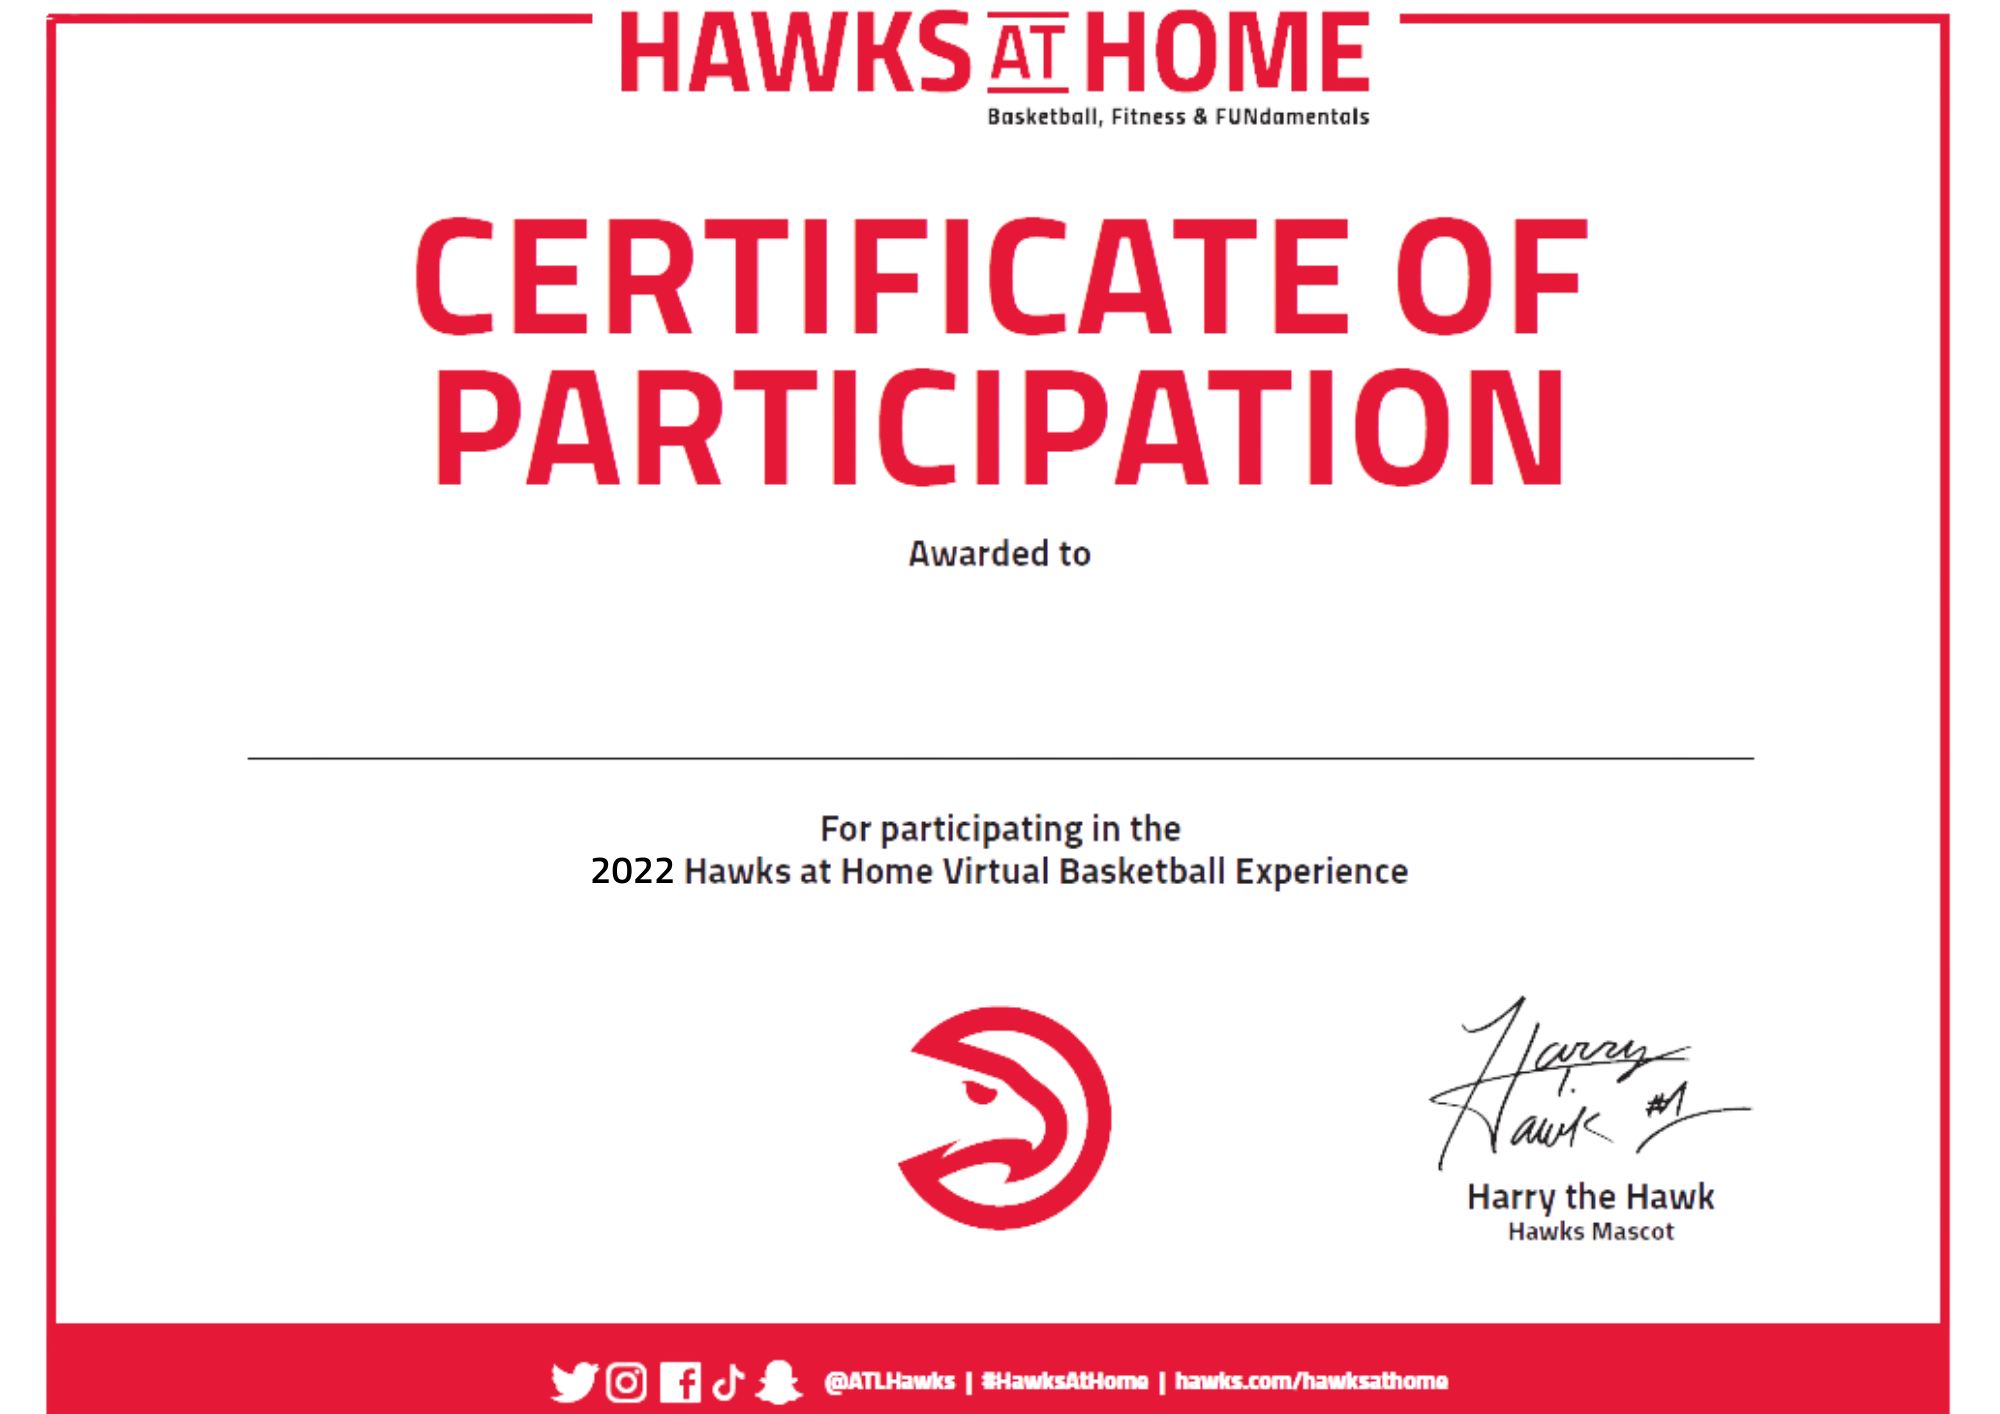 HAWKS AT HOME Certificates